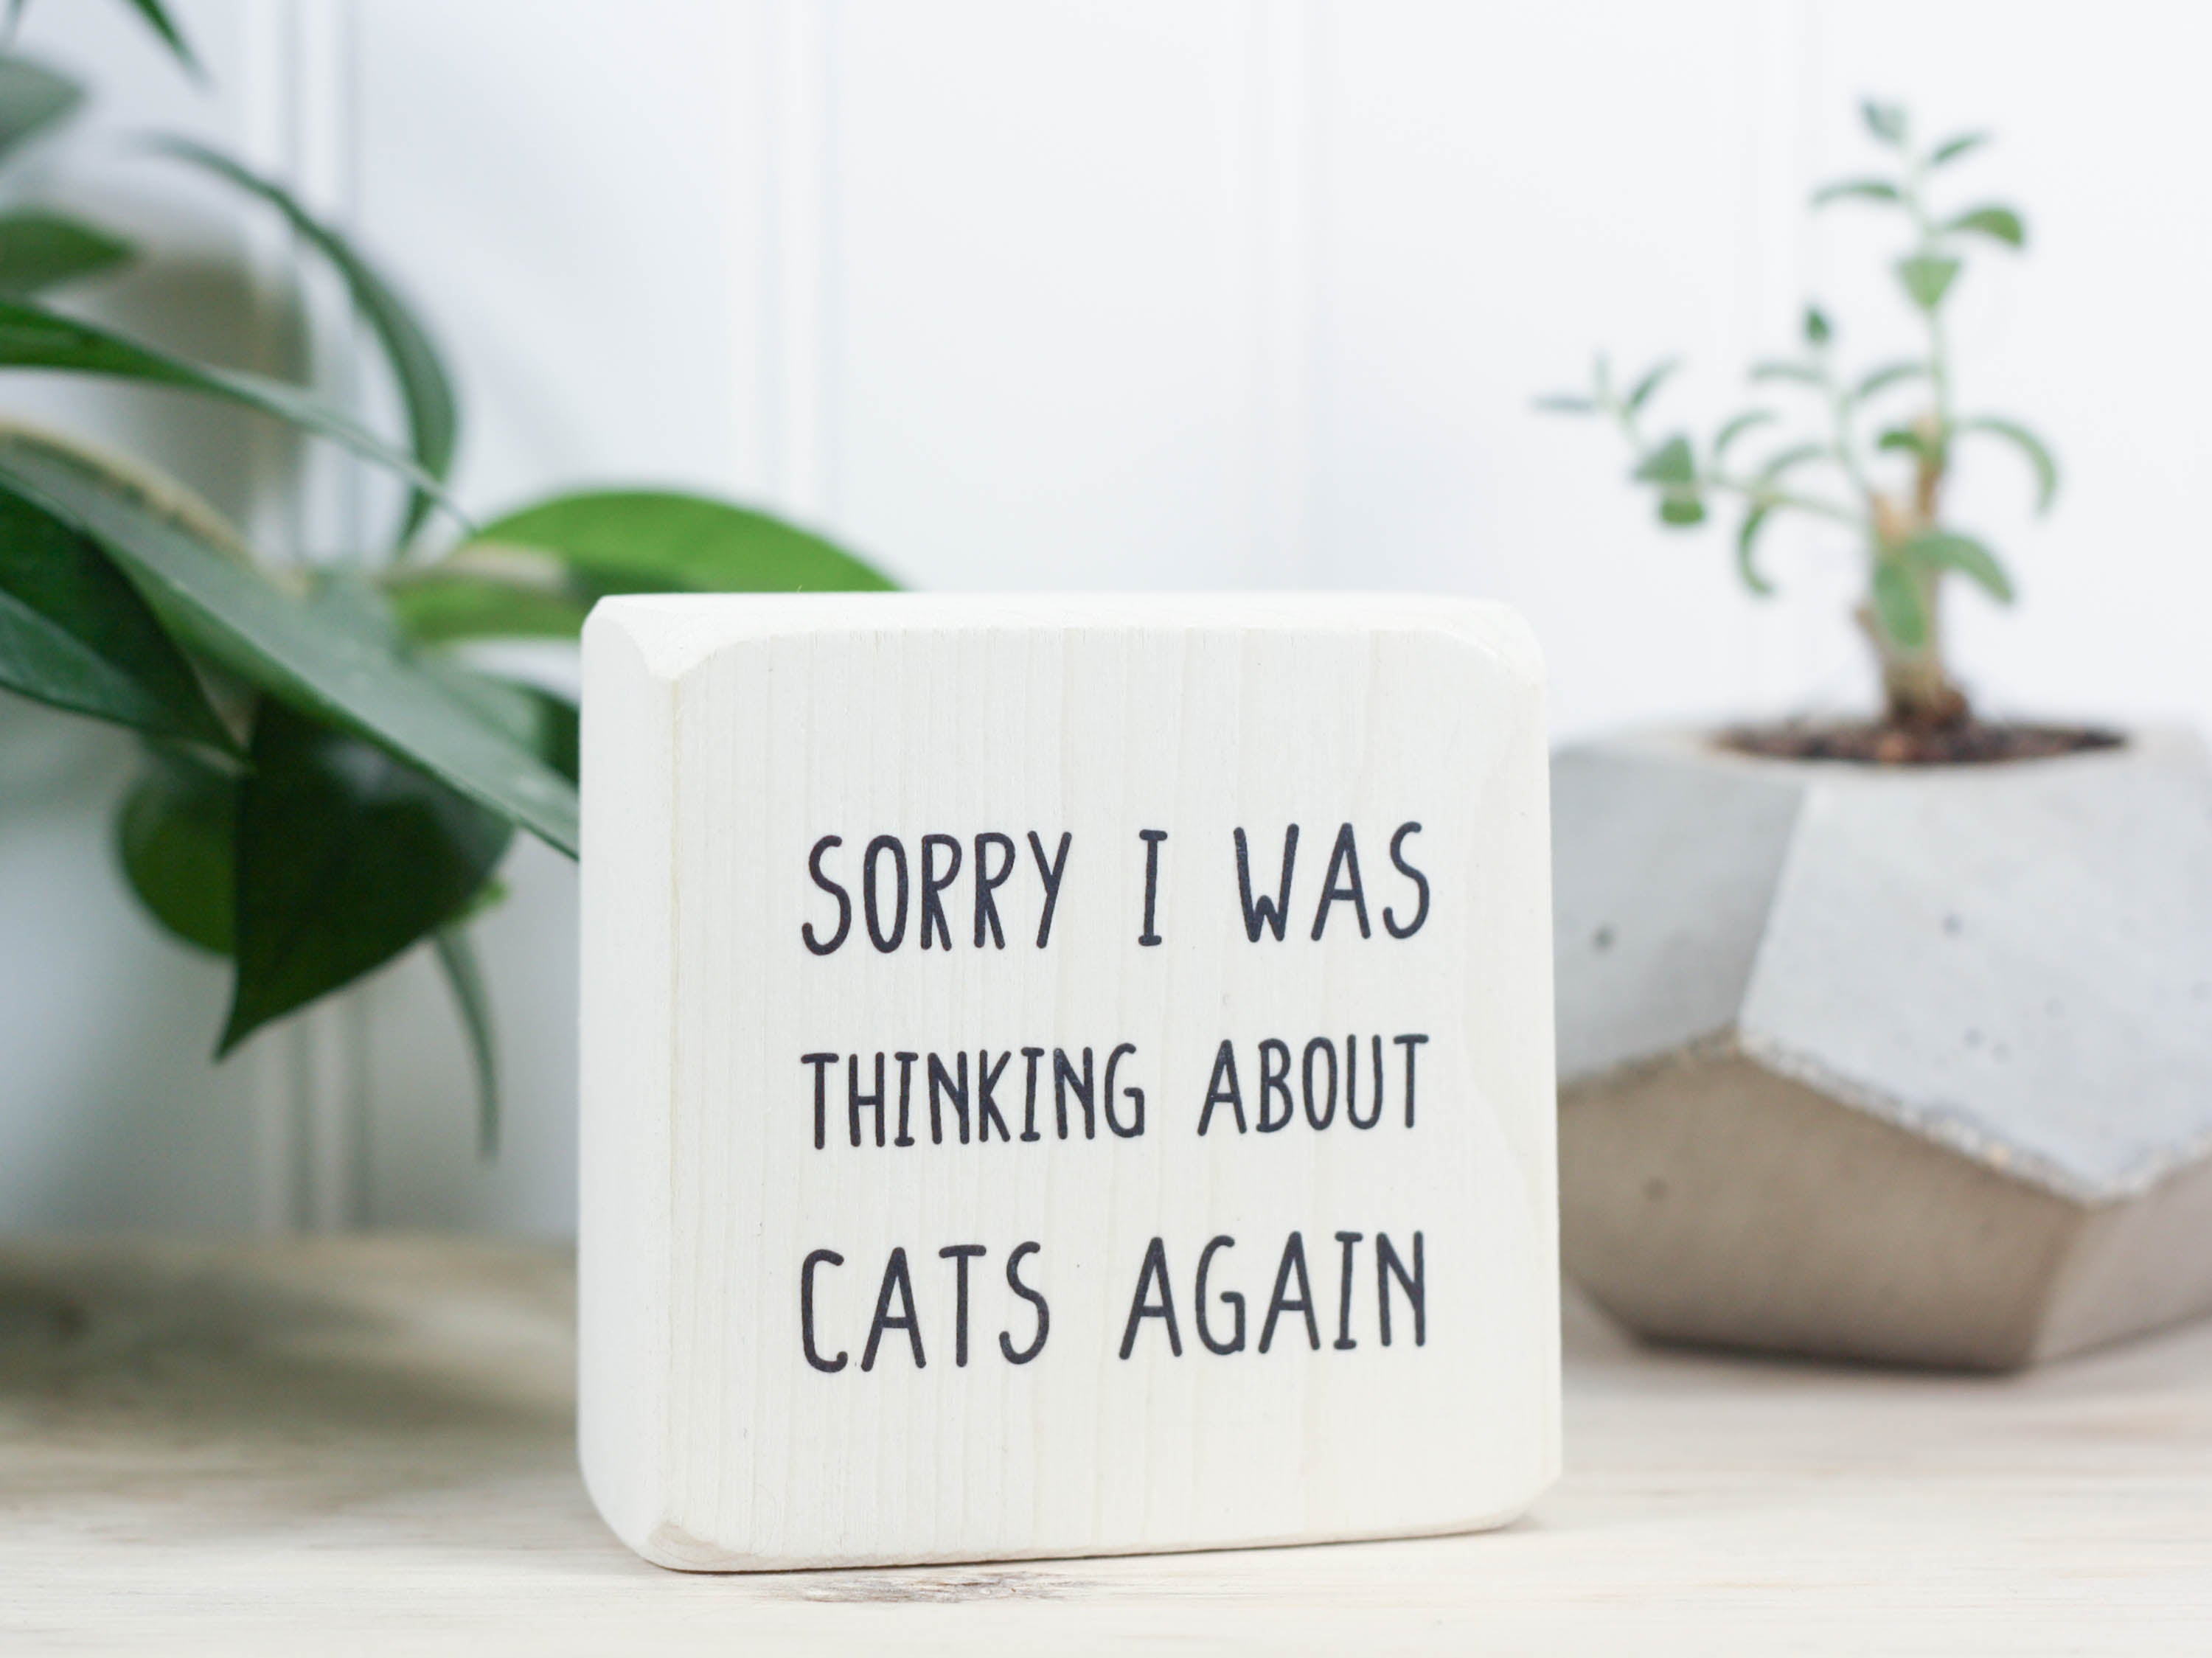 Mini wood sign in whitewash with the saying "Sorry I was thinking about cats again".